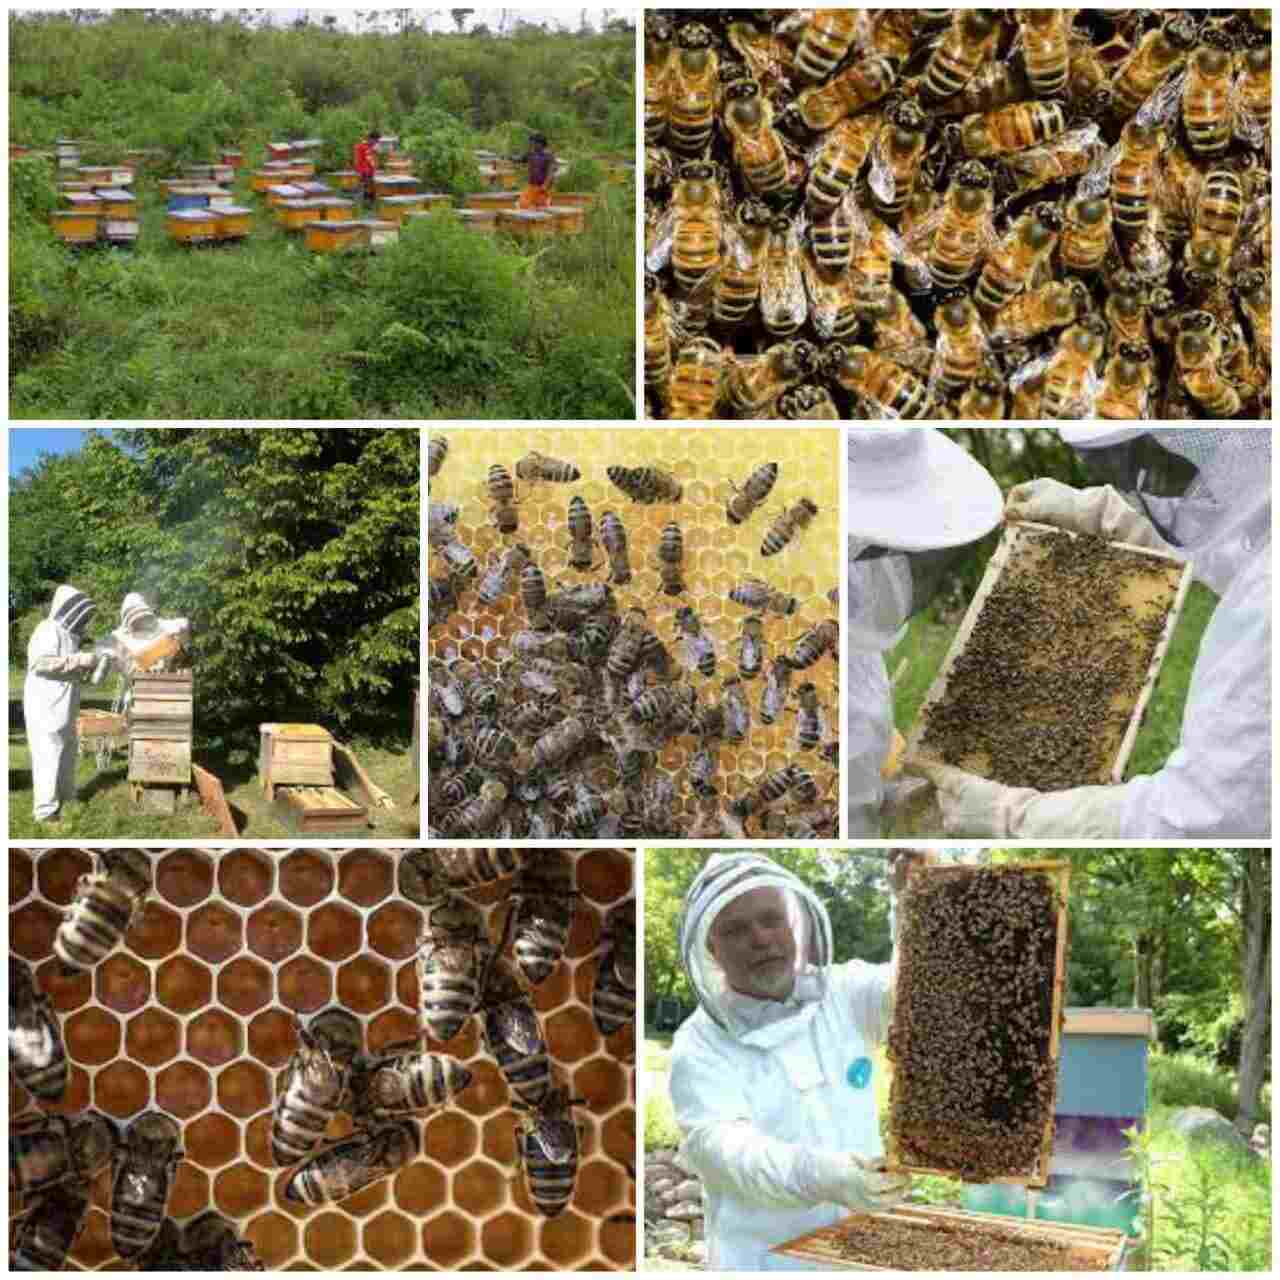 Bee keeping and Honey Processing business